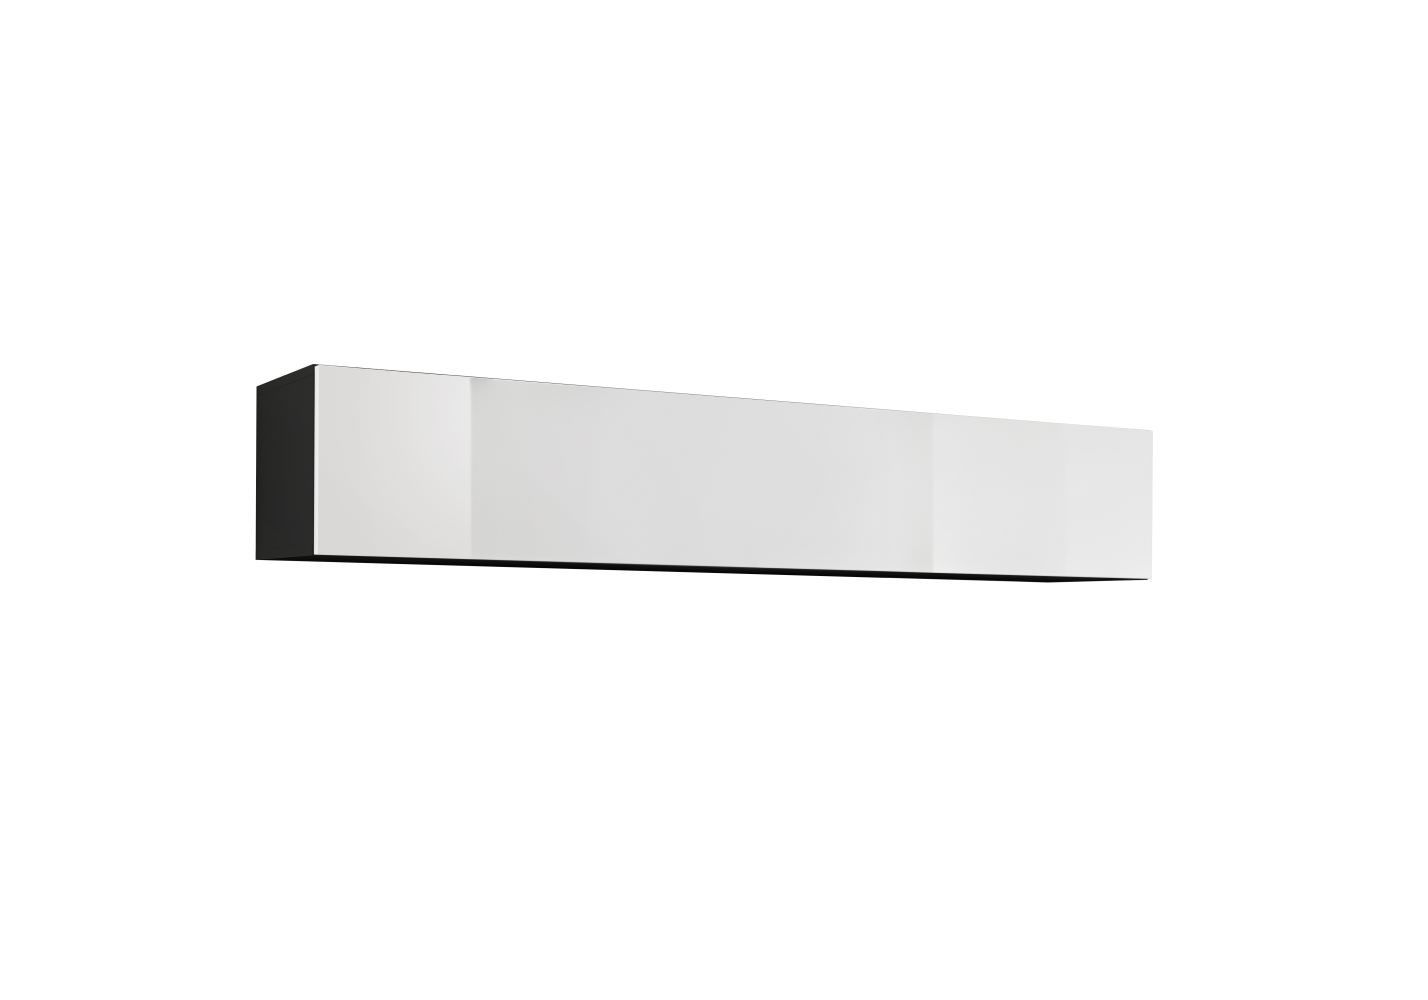 Elegant wall cabinet Raudberg 35, color: white / black - Dimensions: 30 x 160 x 29 cm (H x W x D), with two compartments